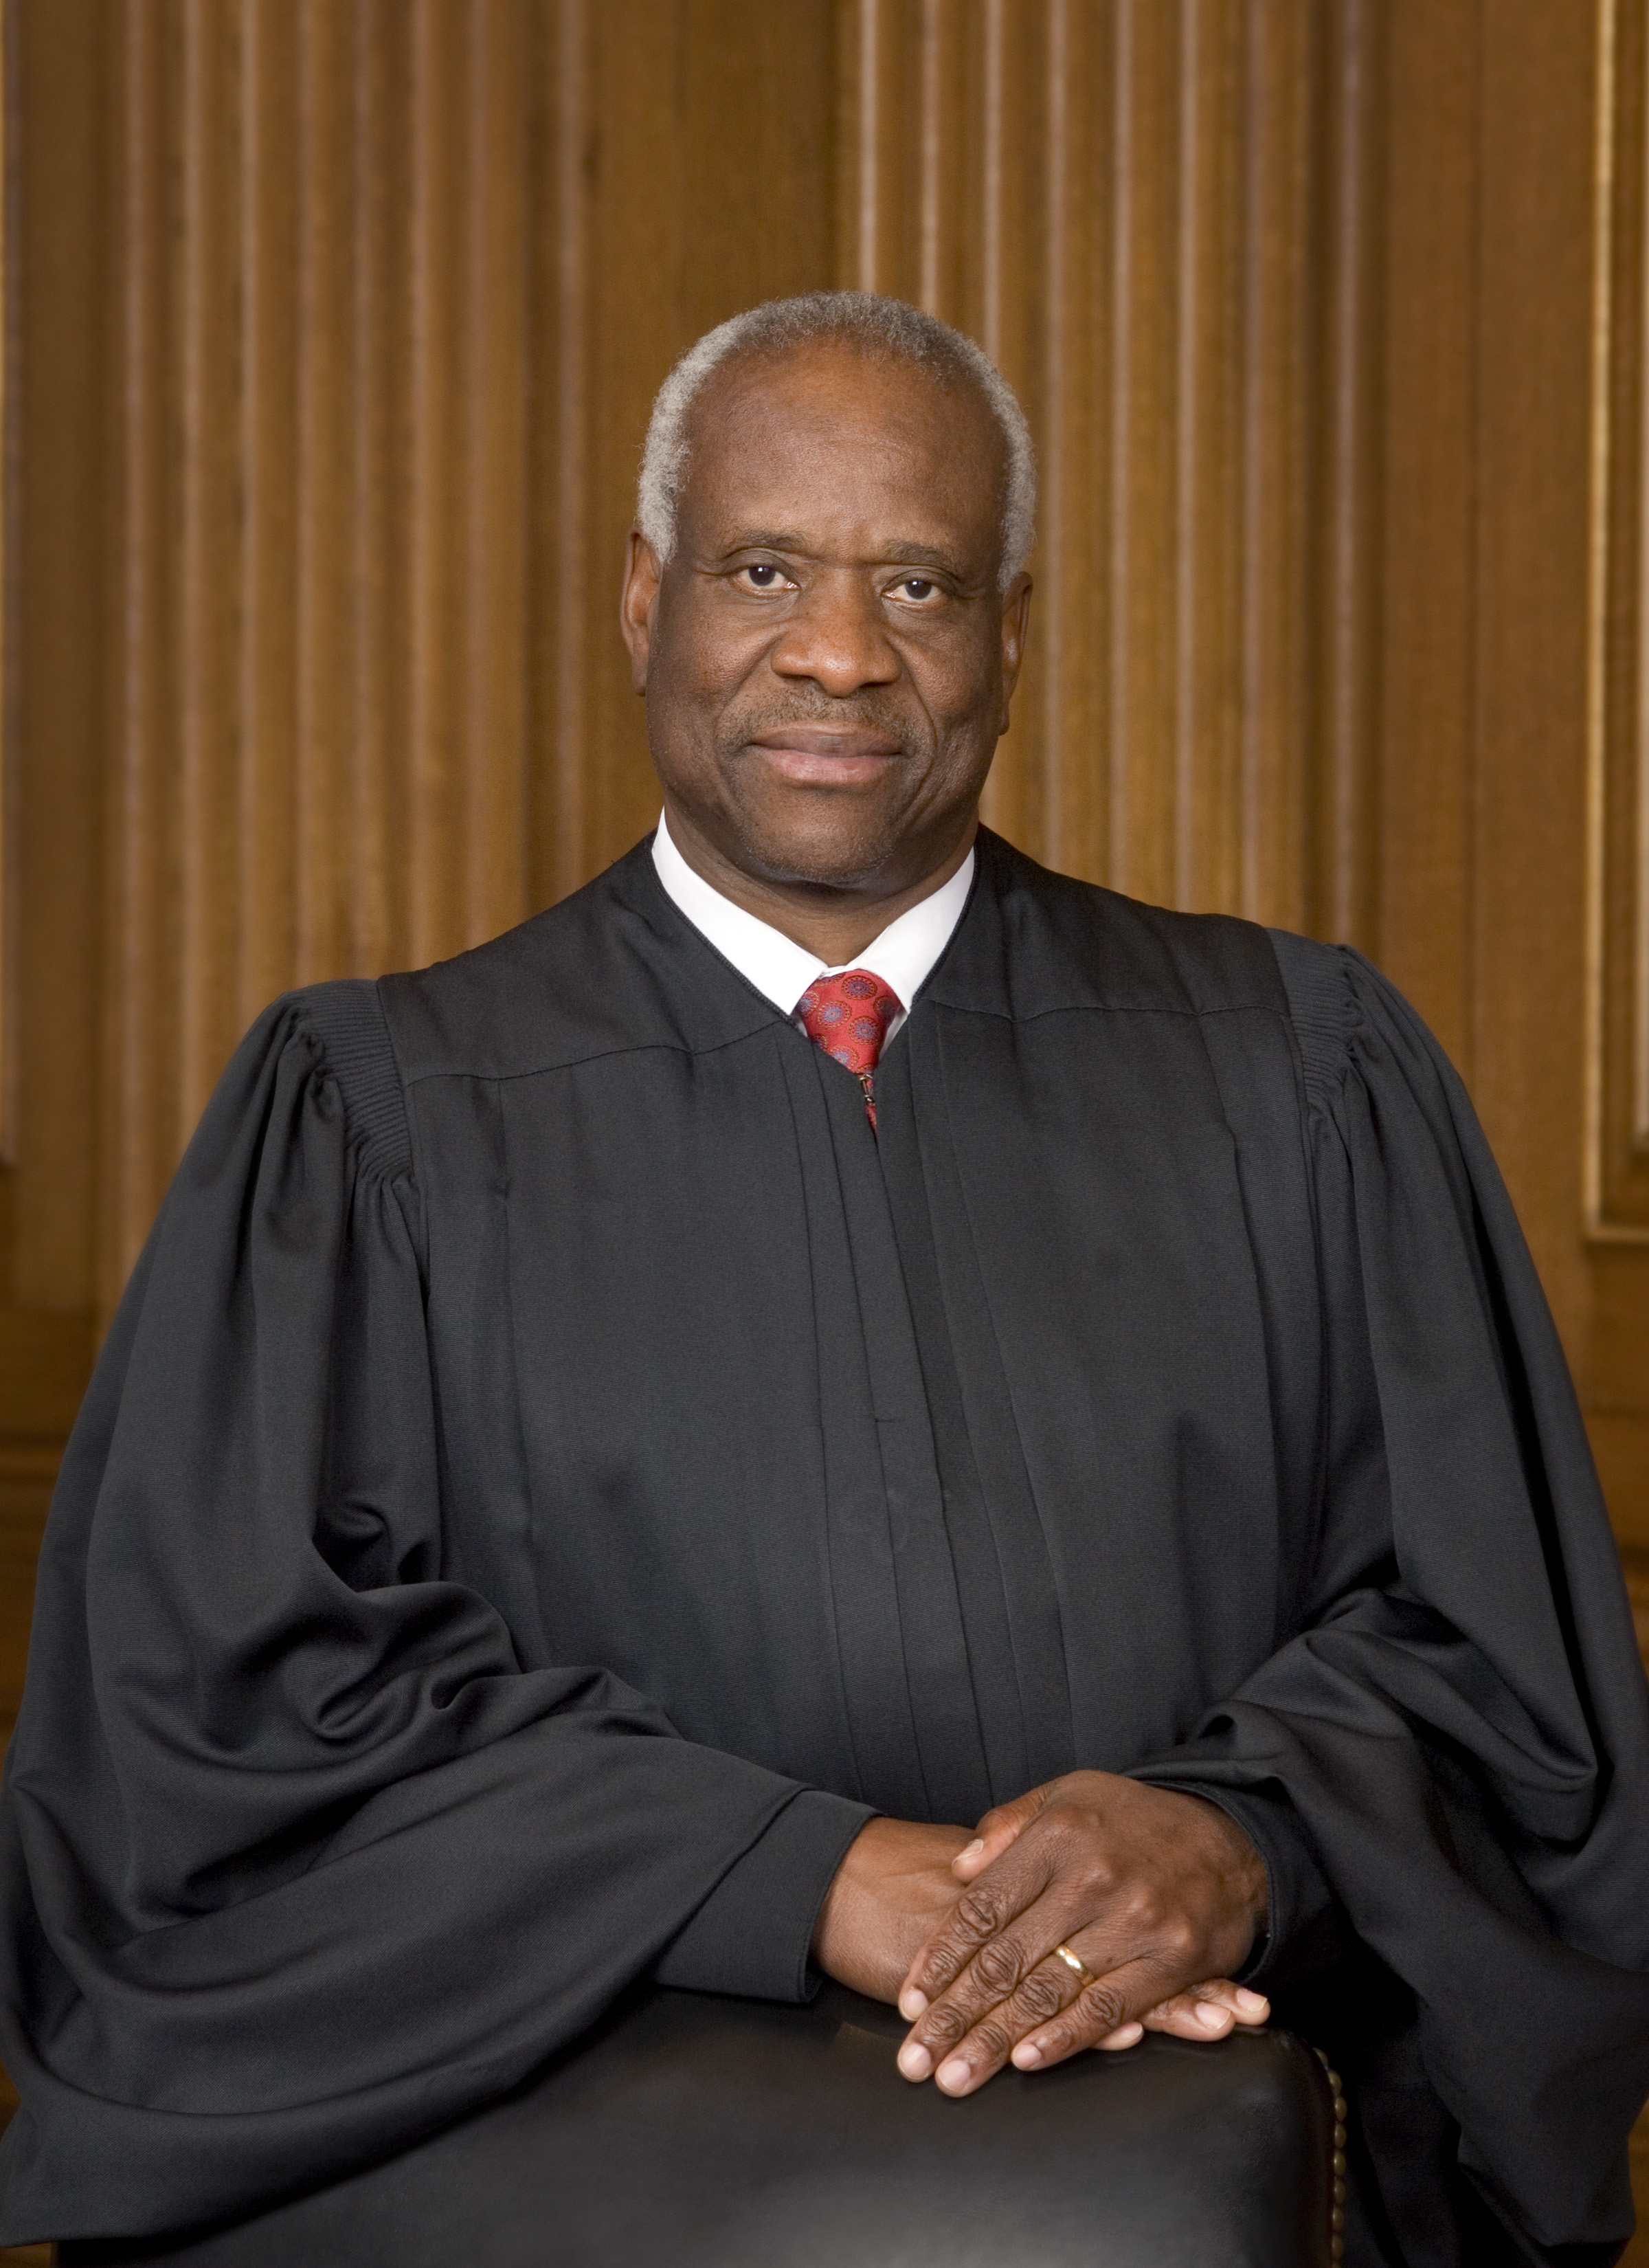 https://upload.wikimedia.org/wikipedia/commons/5/58/Clarence_Thomas_official_SCOTUS_portrait.jpg